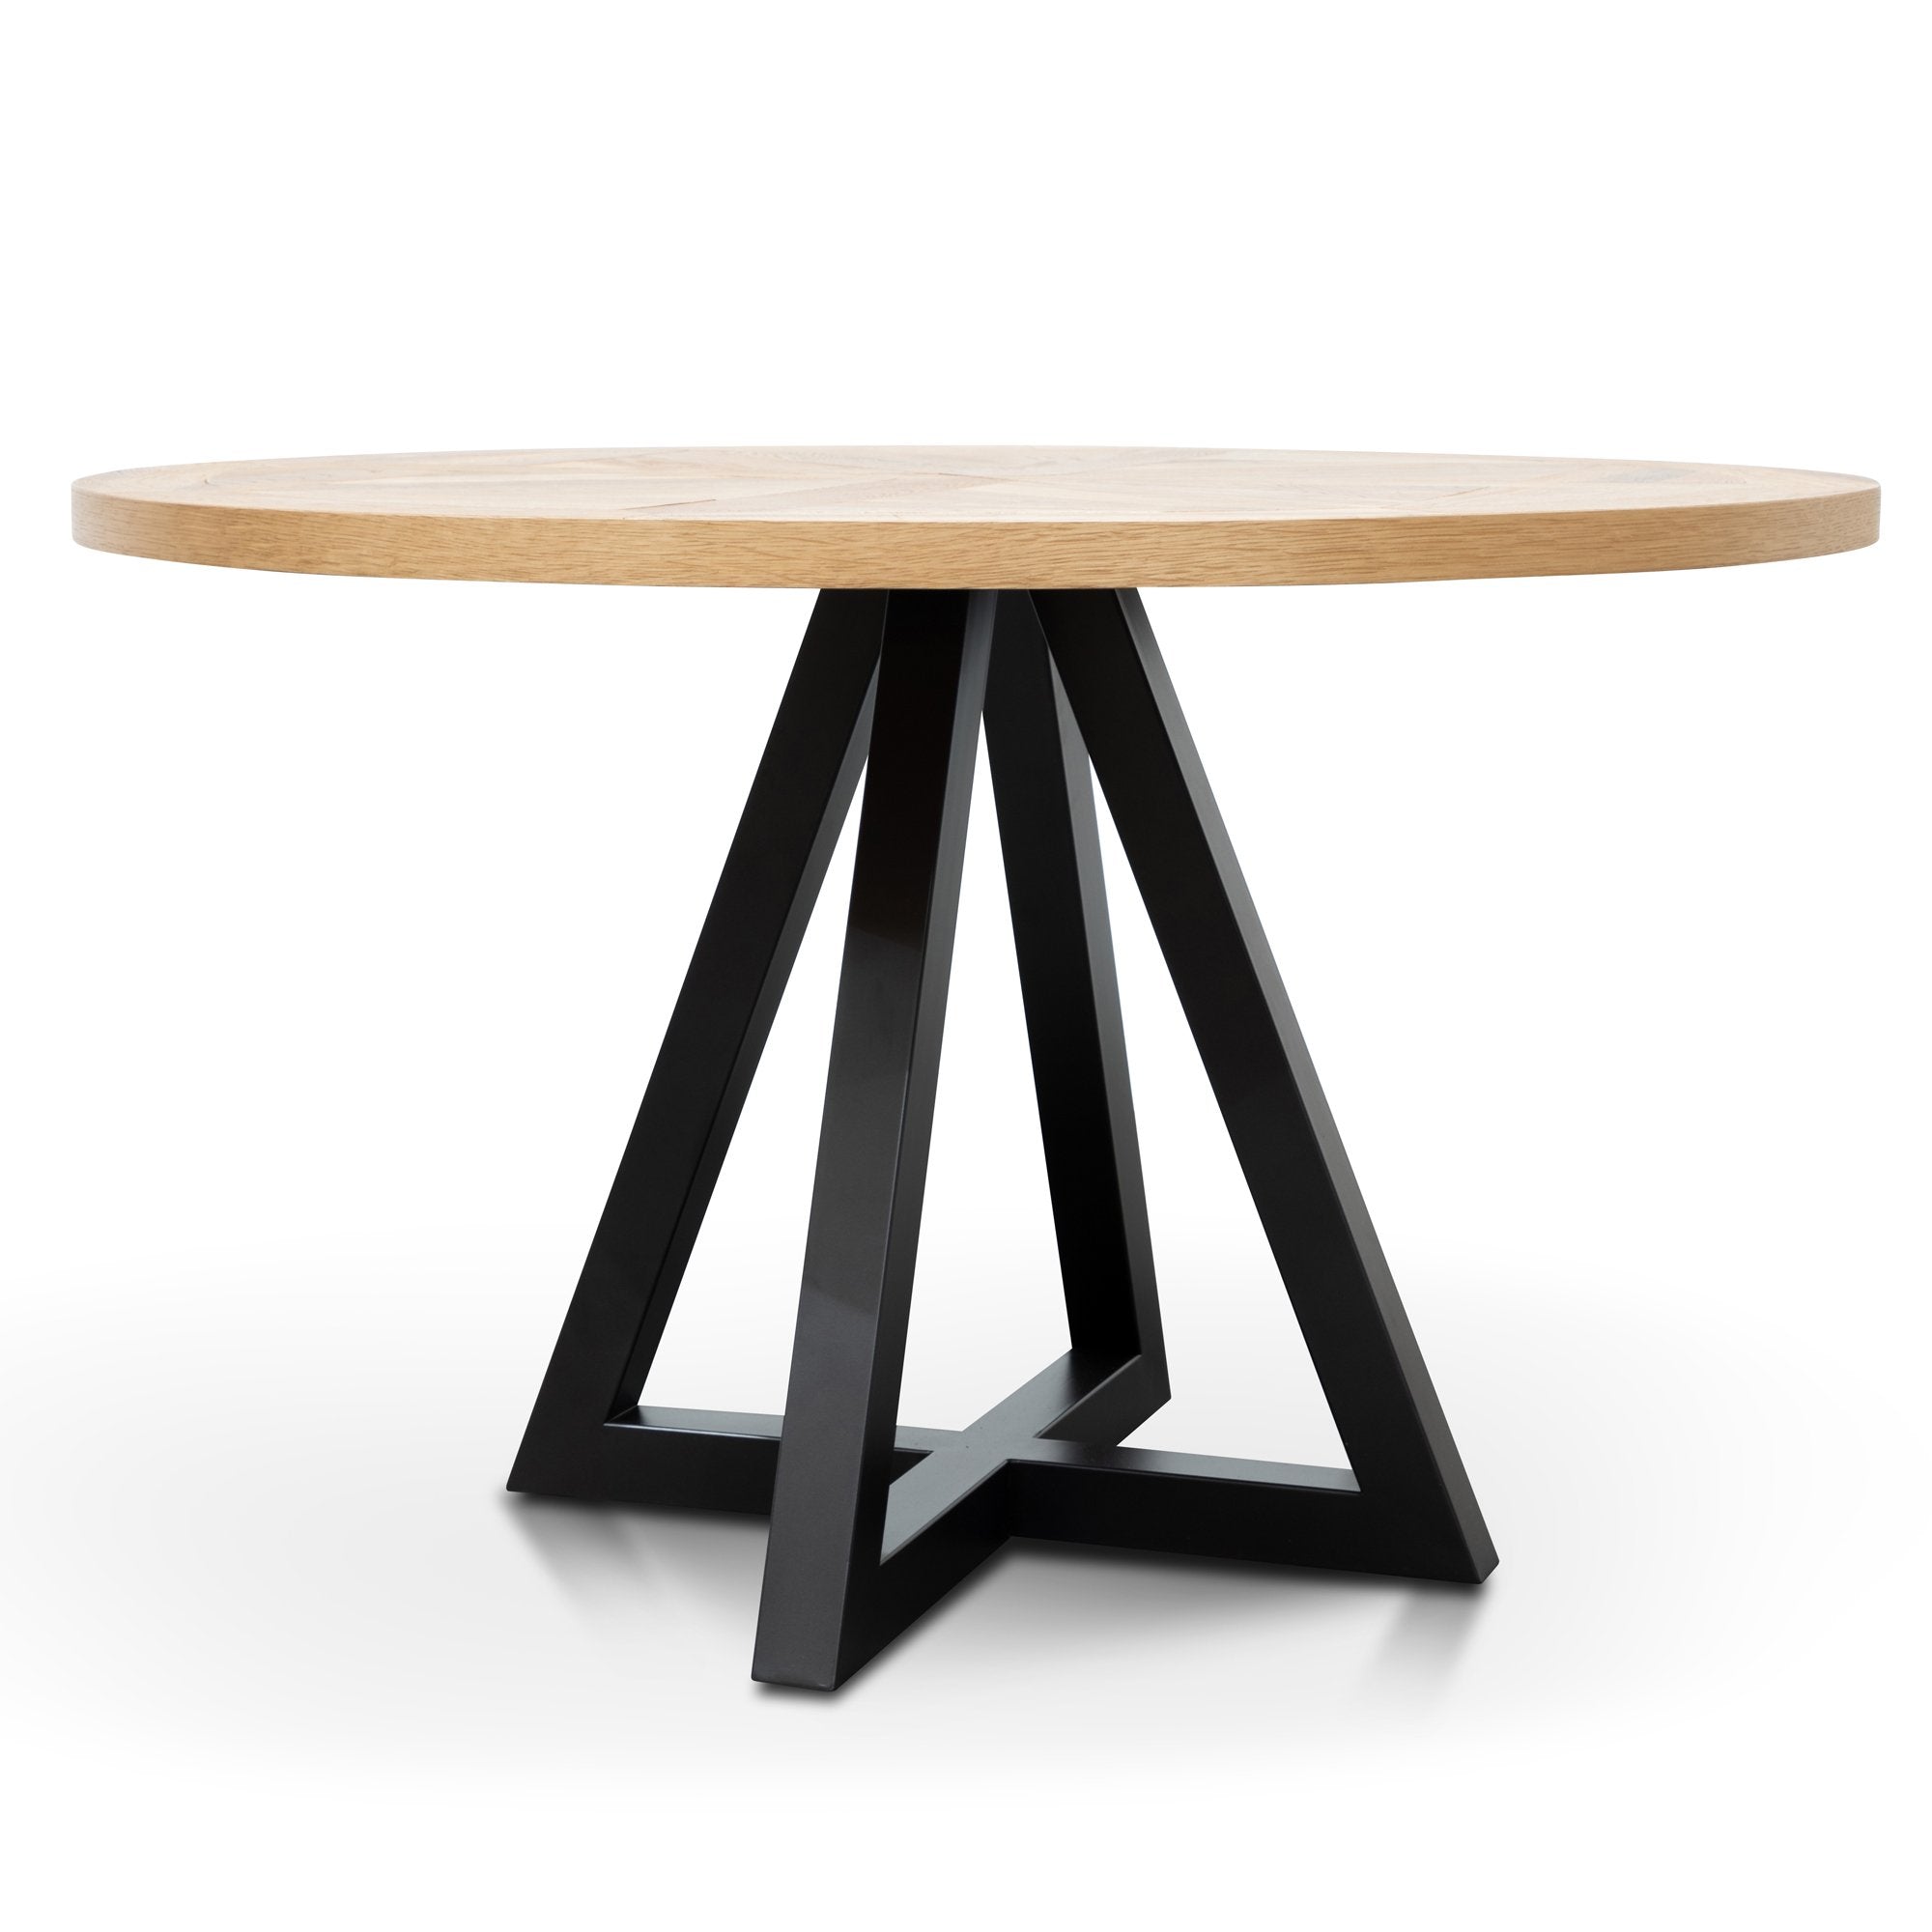 Yume 125cm Round Dining Table - European Knotty Oak and Peppercorn - Dining Tables